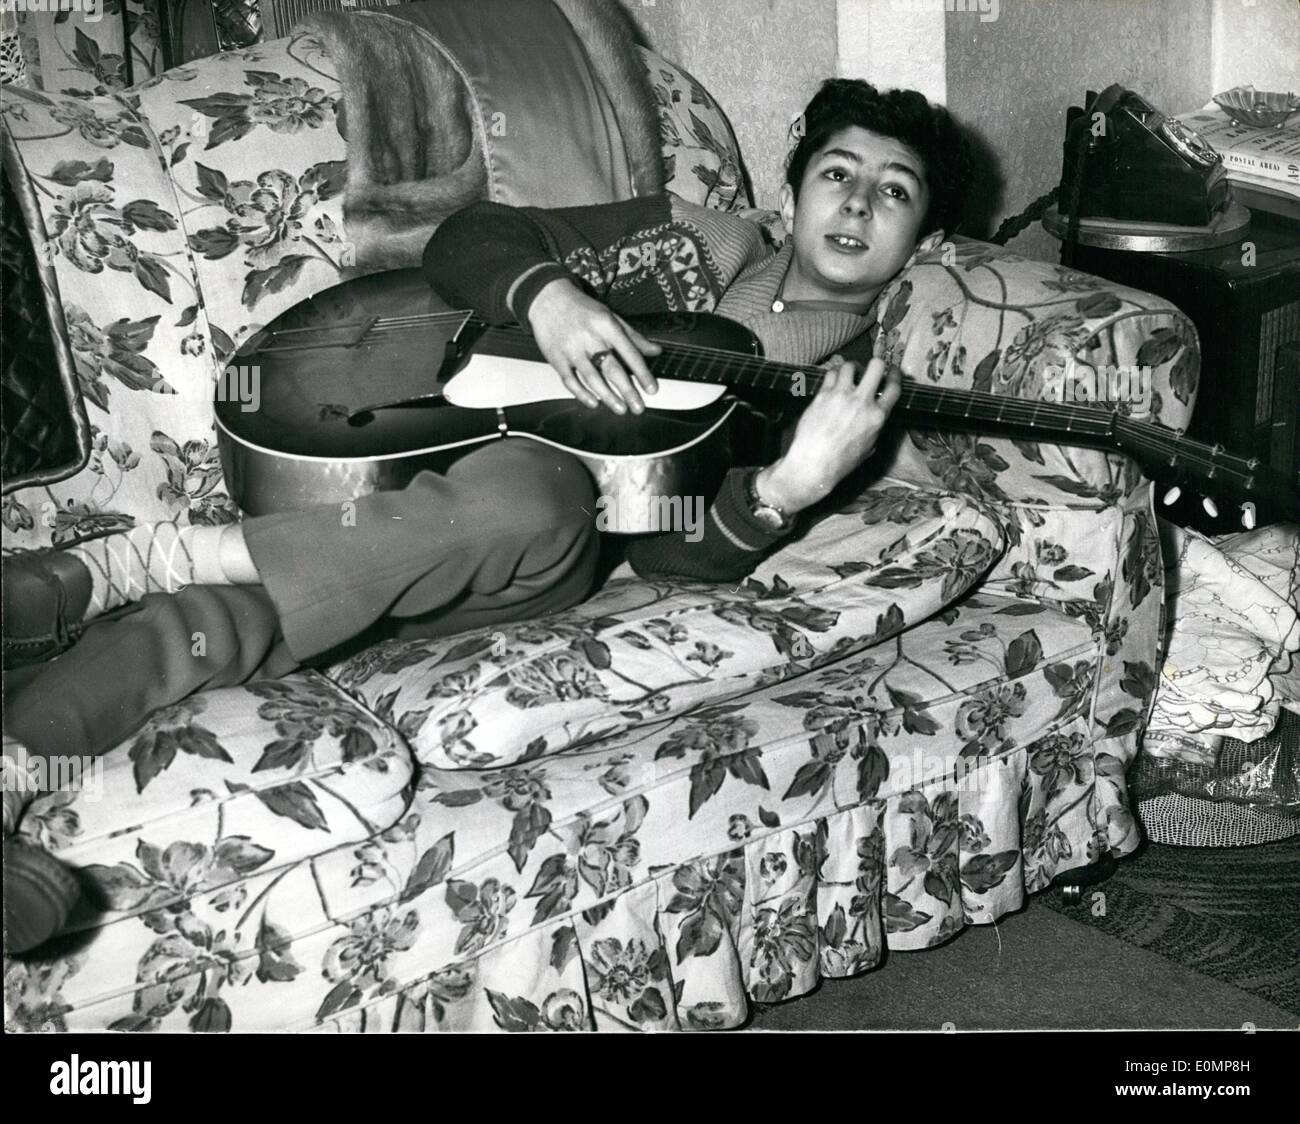 Apr. 04, 1956 - Rock-N-Roll Star Laurie London: Back in London. Fourteen year old rock-roll star Laurie London returned home after his United States tour on Sunday - and was to be seen at his Stamford Hill, London, home. His fathers Bill London said that he was singing tutor for him so that he would not have to go to school. He is also expecting to receive a film contract in the  future. Photo Shows Laurie London at his Stamford Hill home yesterday. Stock Photo